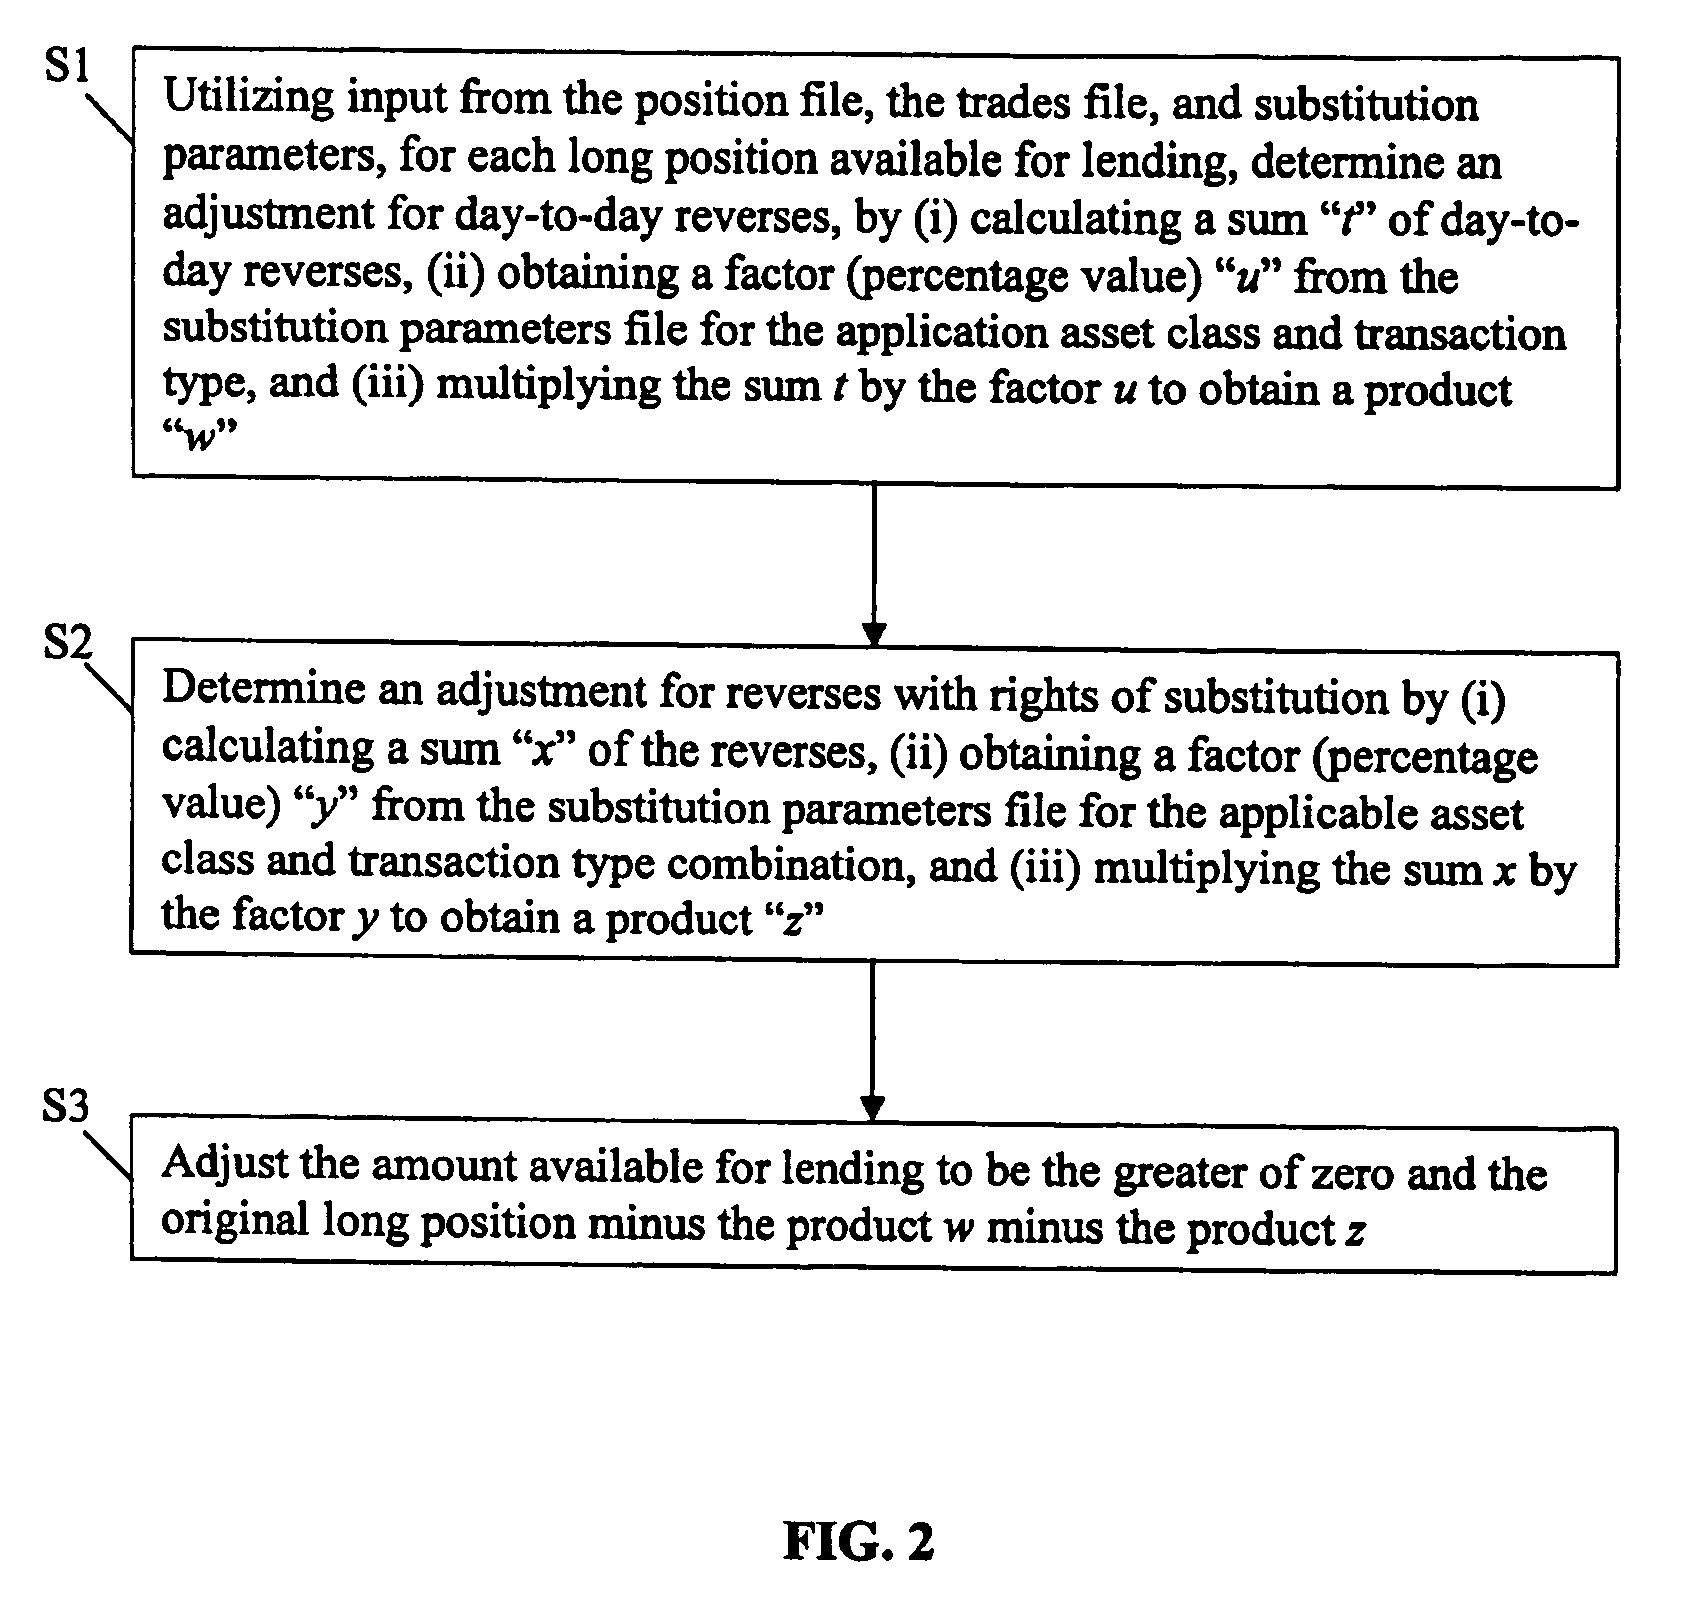 Method and system for efficiently matching long and short positions in securities trading and transacting a series of overnight trades for balance sheet netting